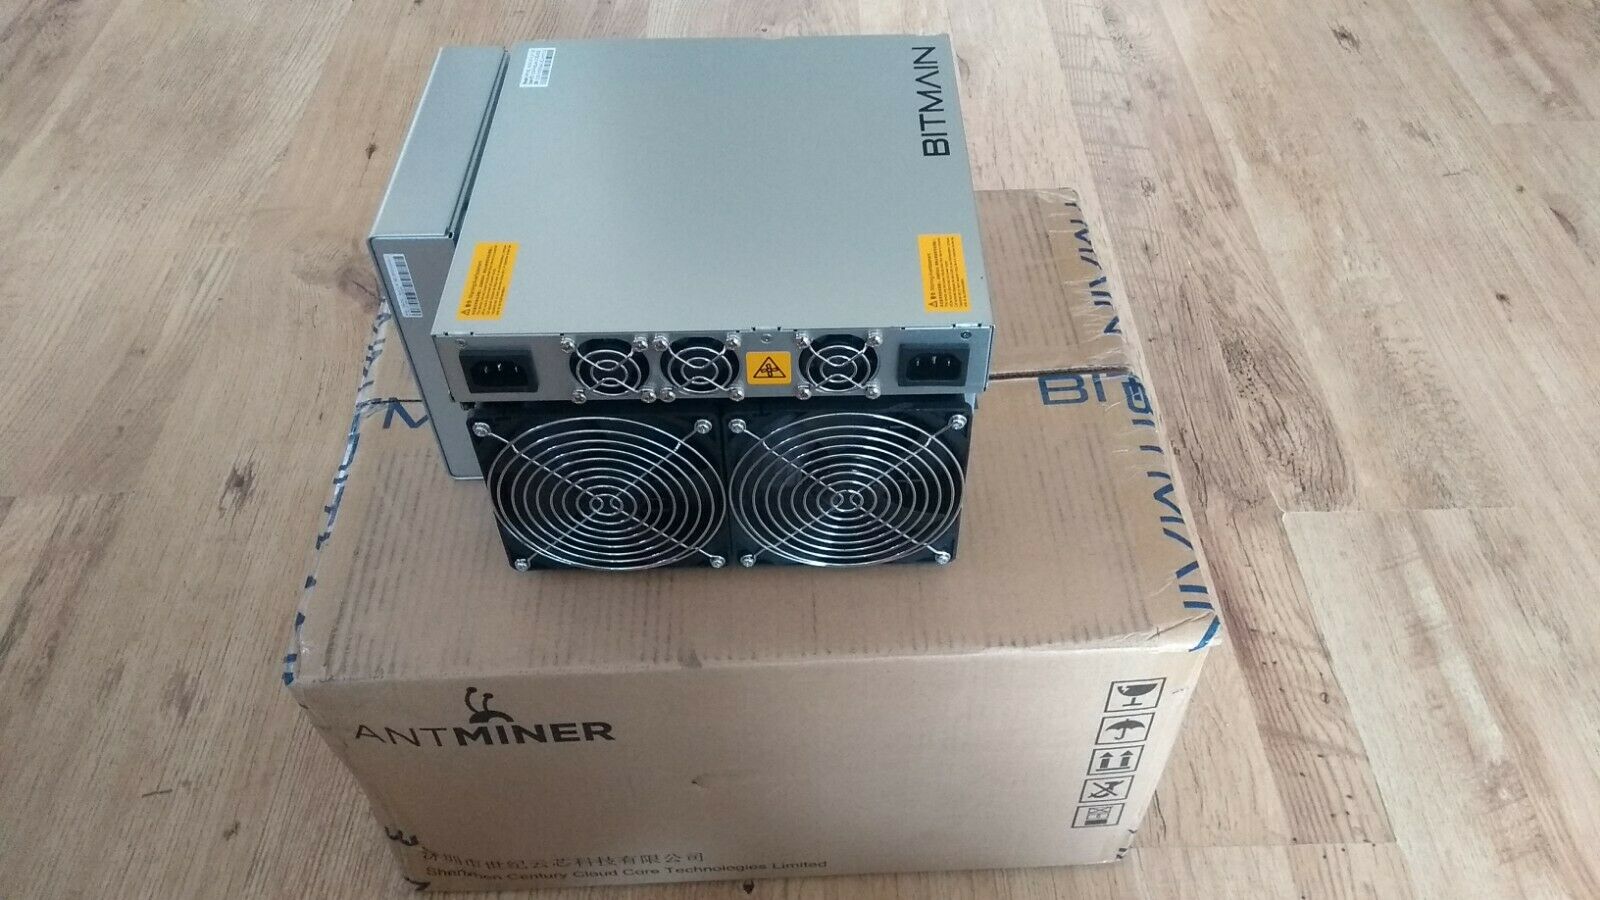 Antminer s21 hydro 335 th s. Antminer s17 Pro. ASIC s17 Pro. Antminer s17 + 73th. T17 Antminer коробка.